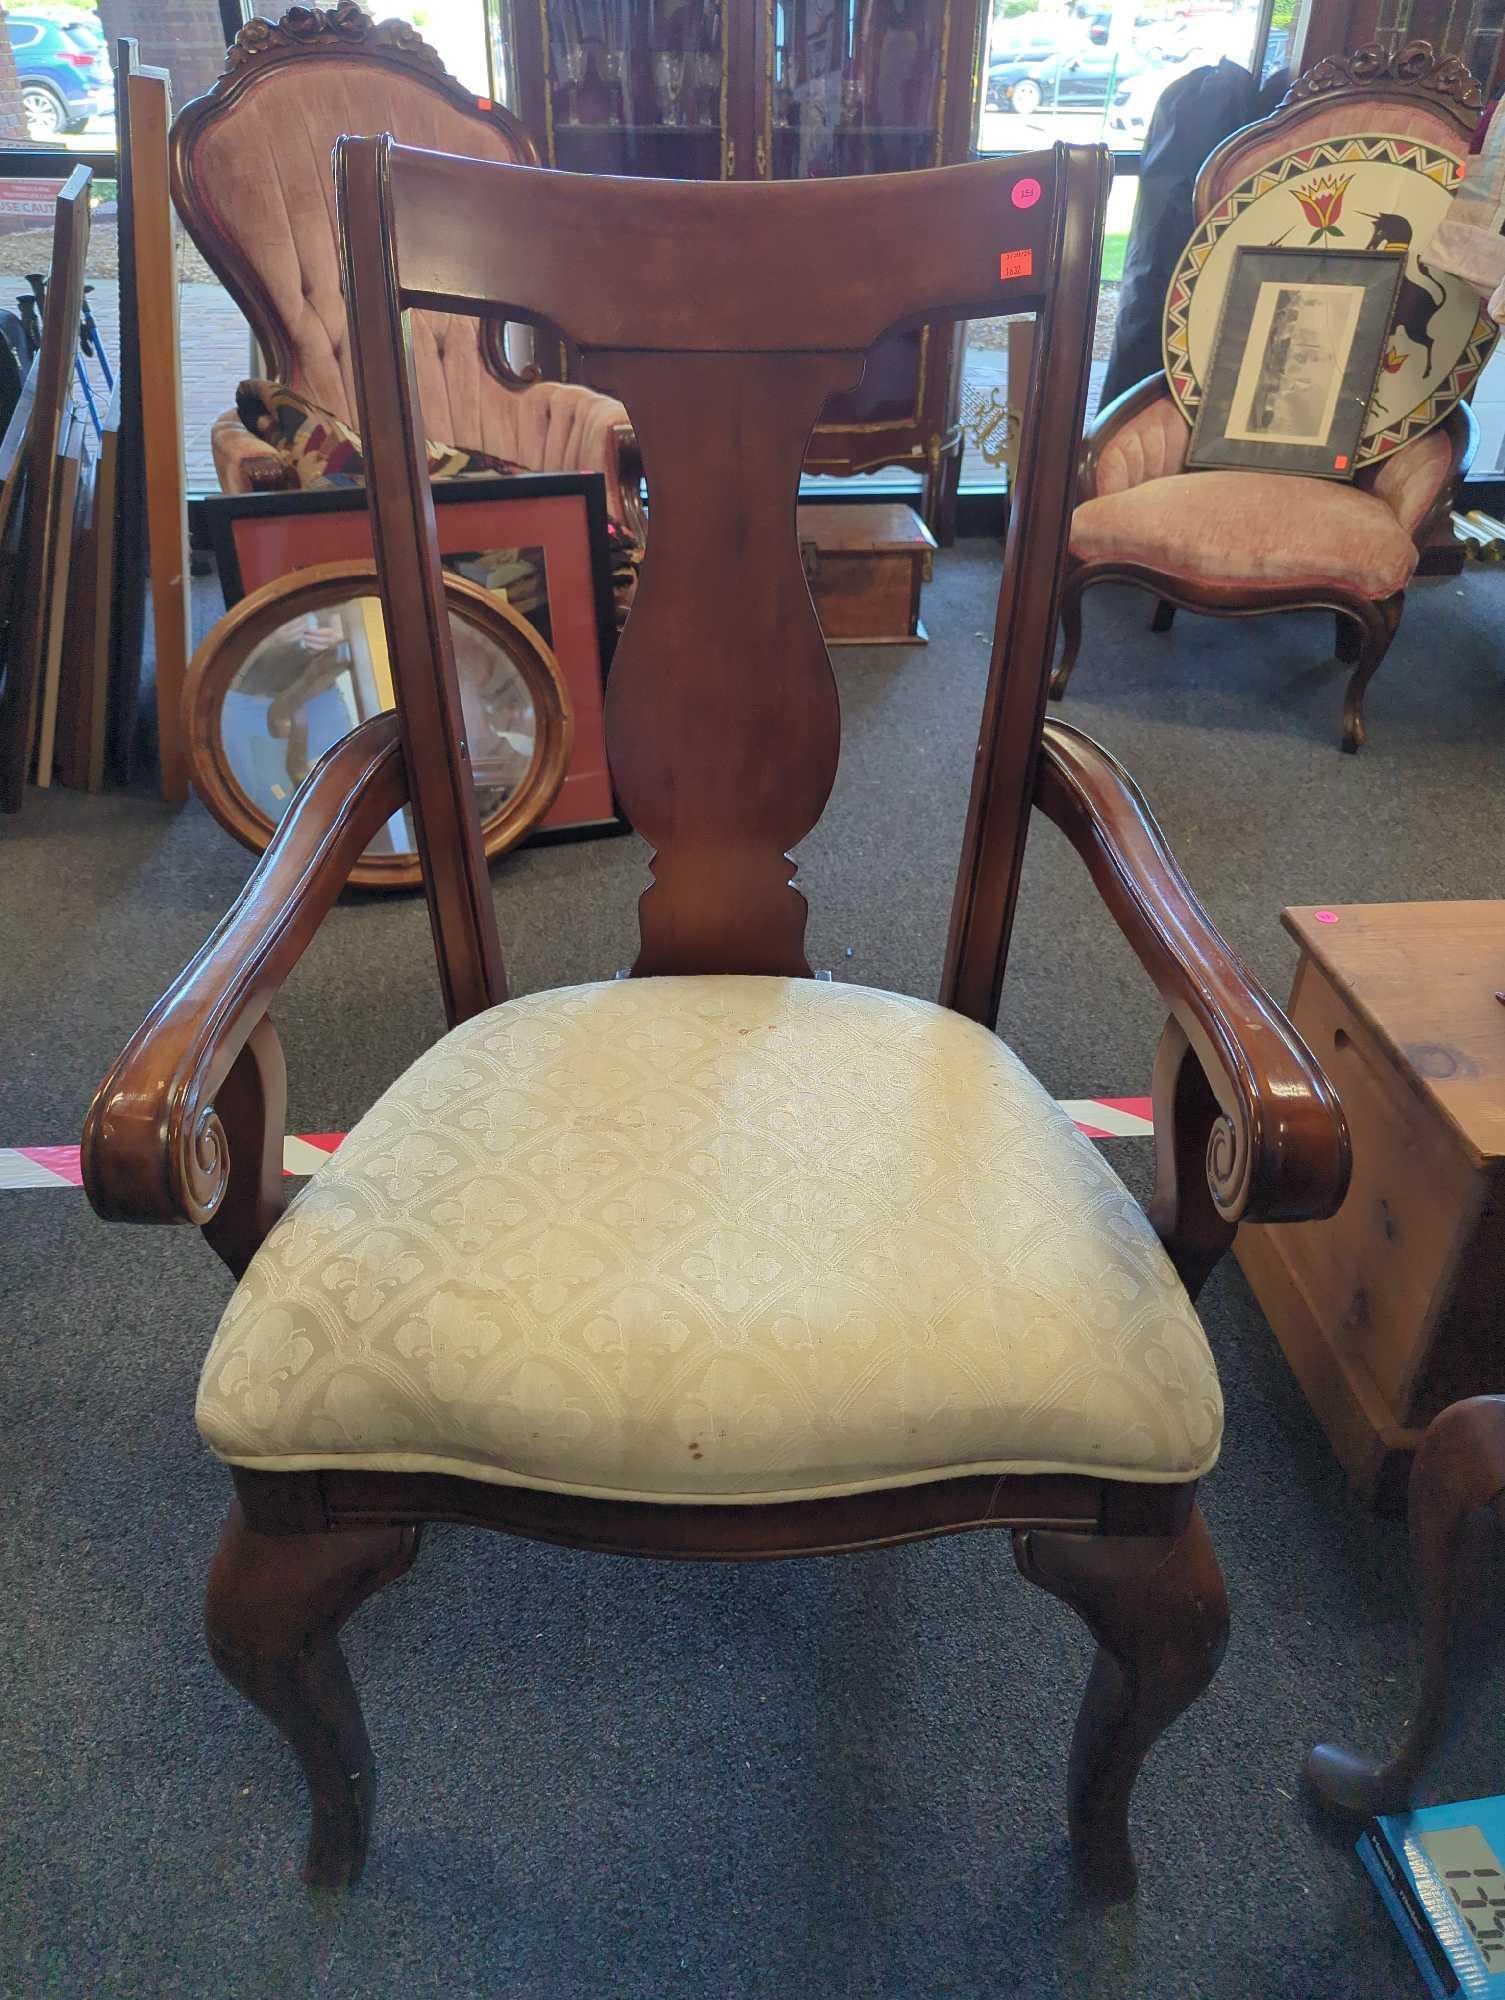 Lot of 6 Matching Queen Anne Dining Chairs to Include 2 Captains Chairs, Matches Lot Number 153,